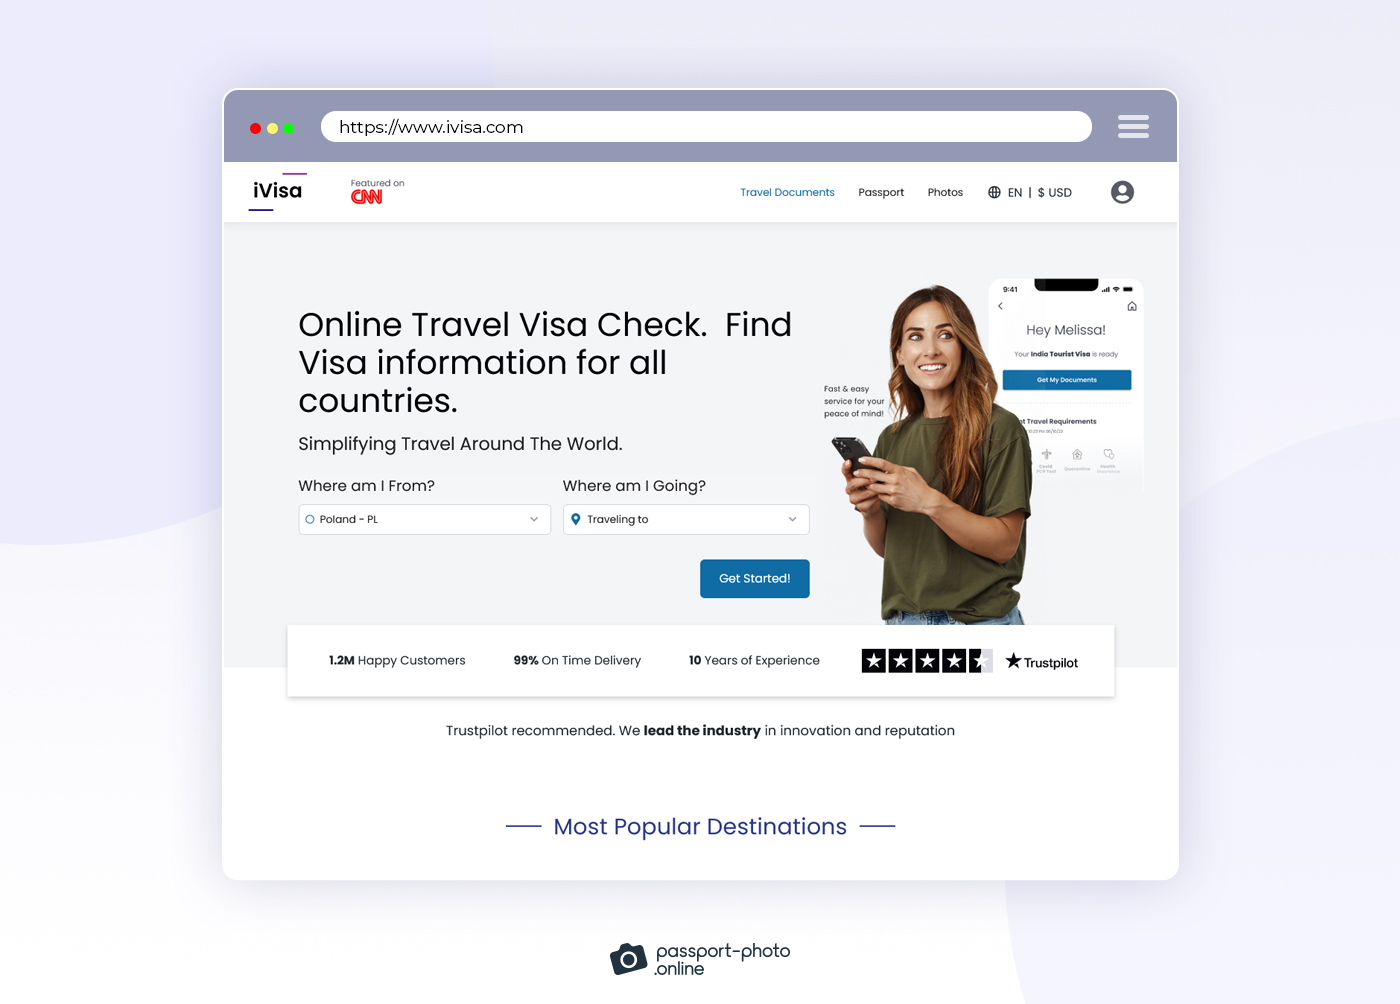 iVisa is a service that provides customers with passport photos.